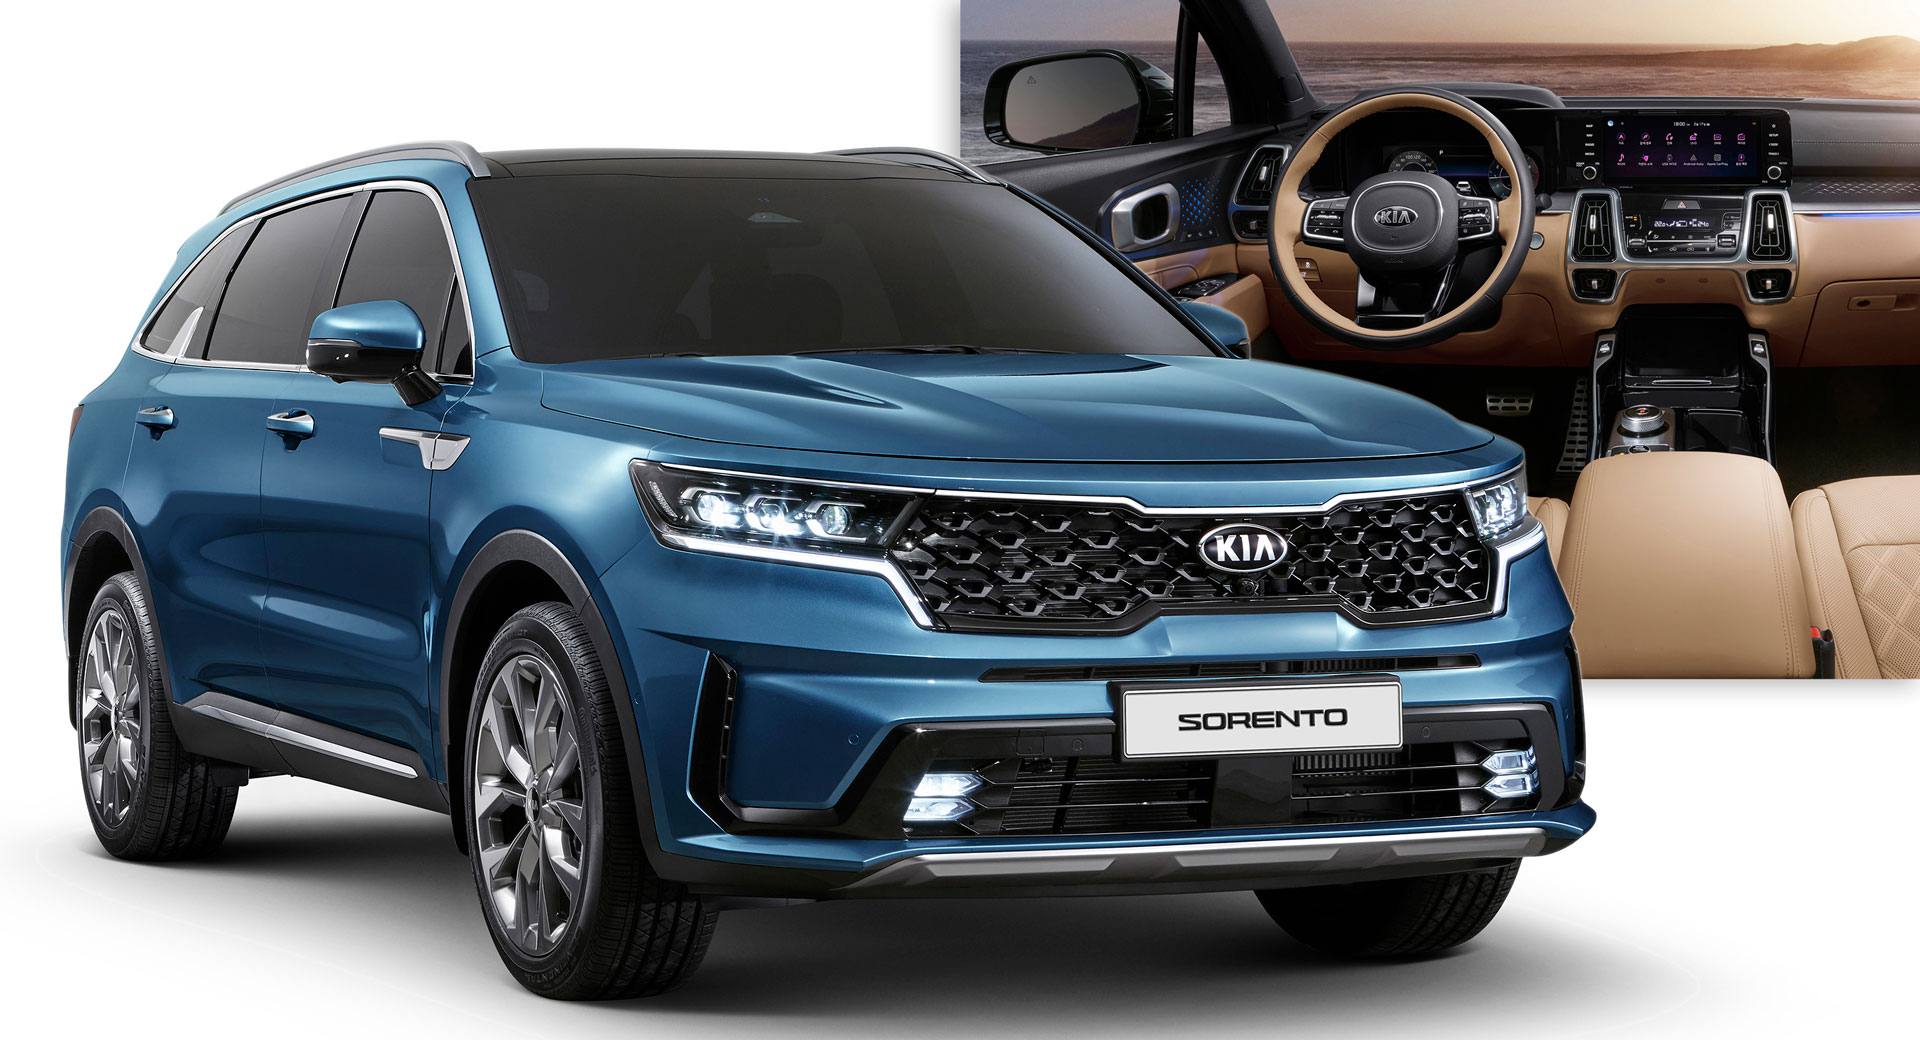 2021 Kia Sorento: Here Are The First Official Images And Details ...